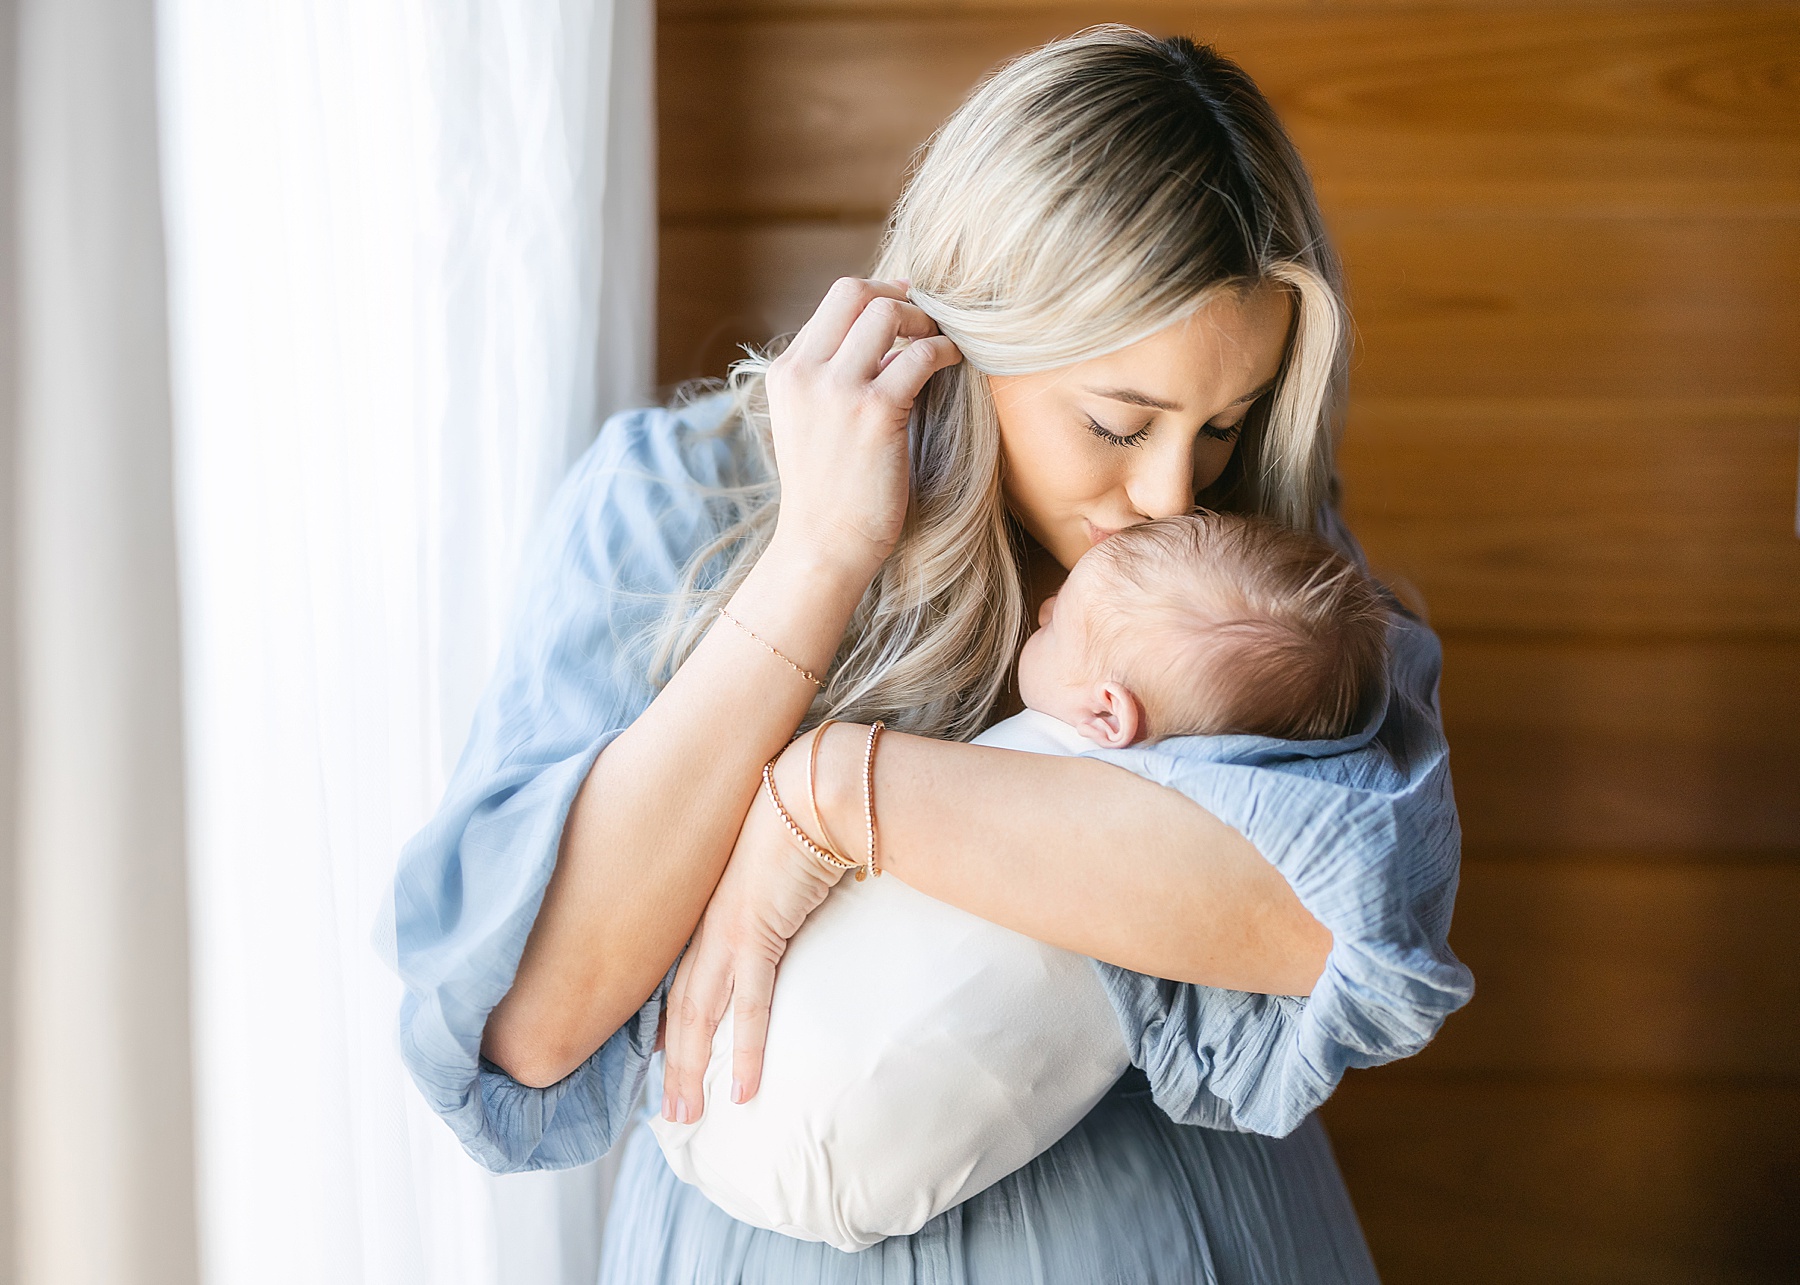 blond haired woman in long blue dress kissing newborn baby boy wrapped in white swaddle by window